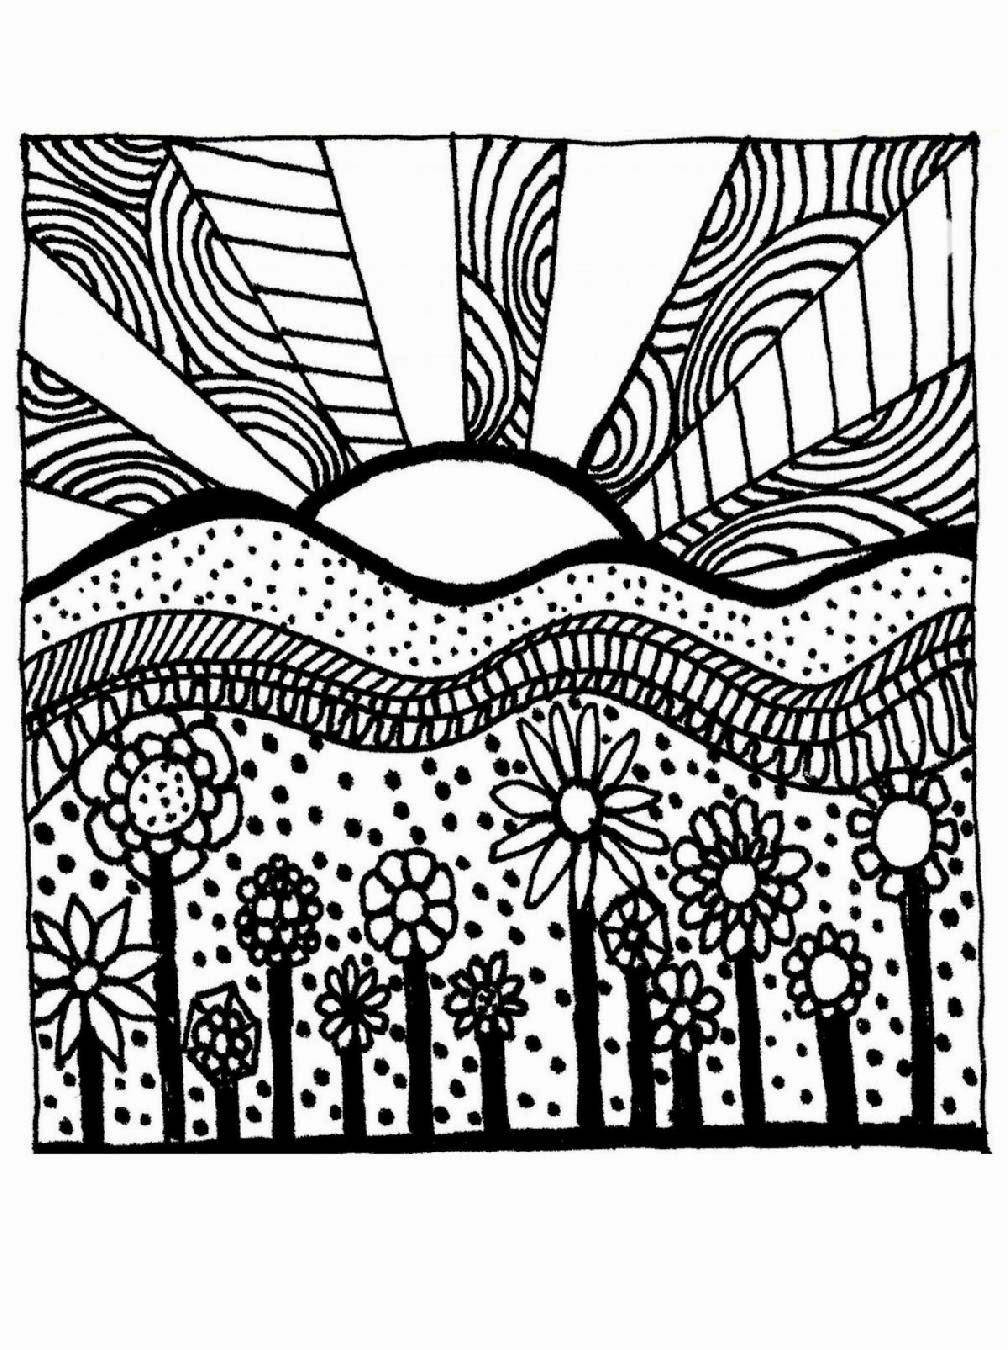 Coloring The sunset and flowers. Category coloring pages for teenagers. Tags:  the sun, flowers, the horizon.